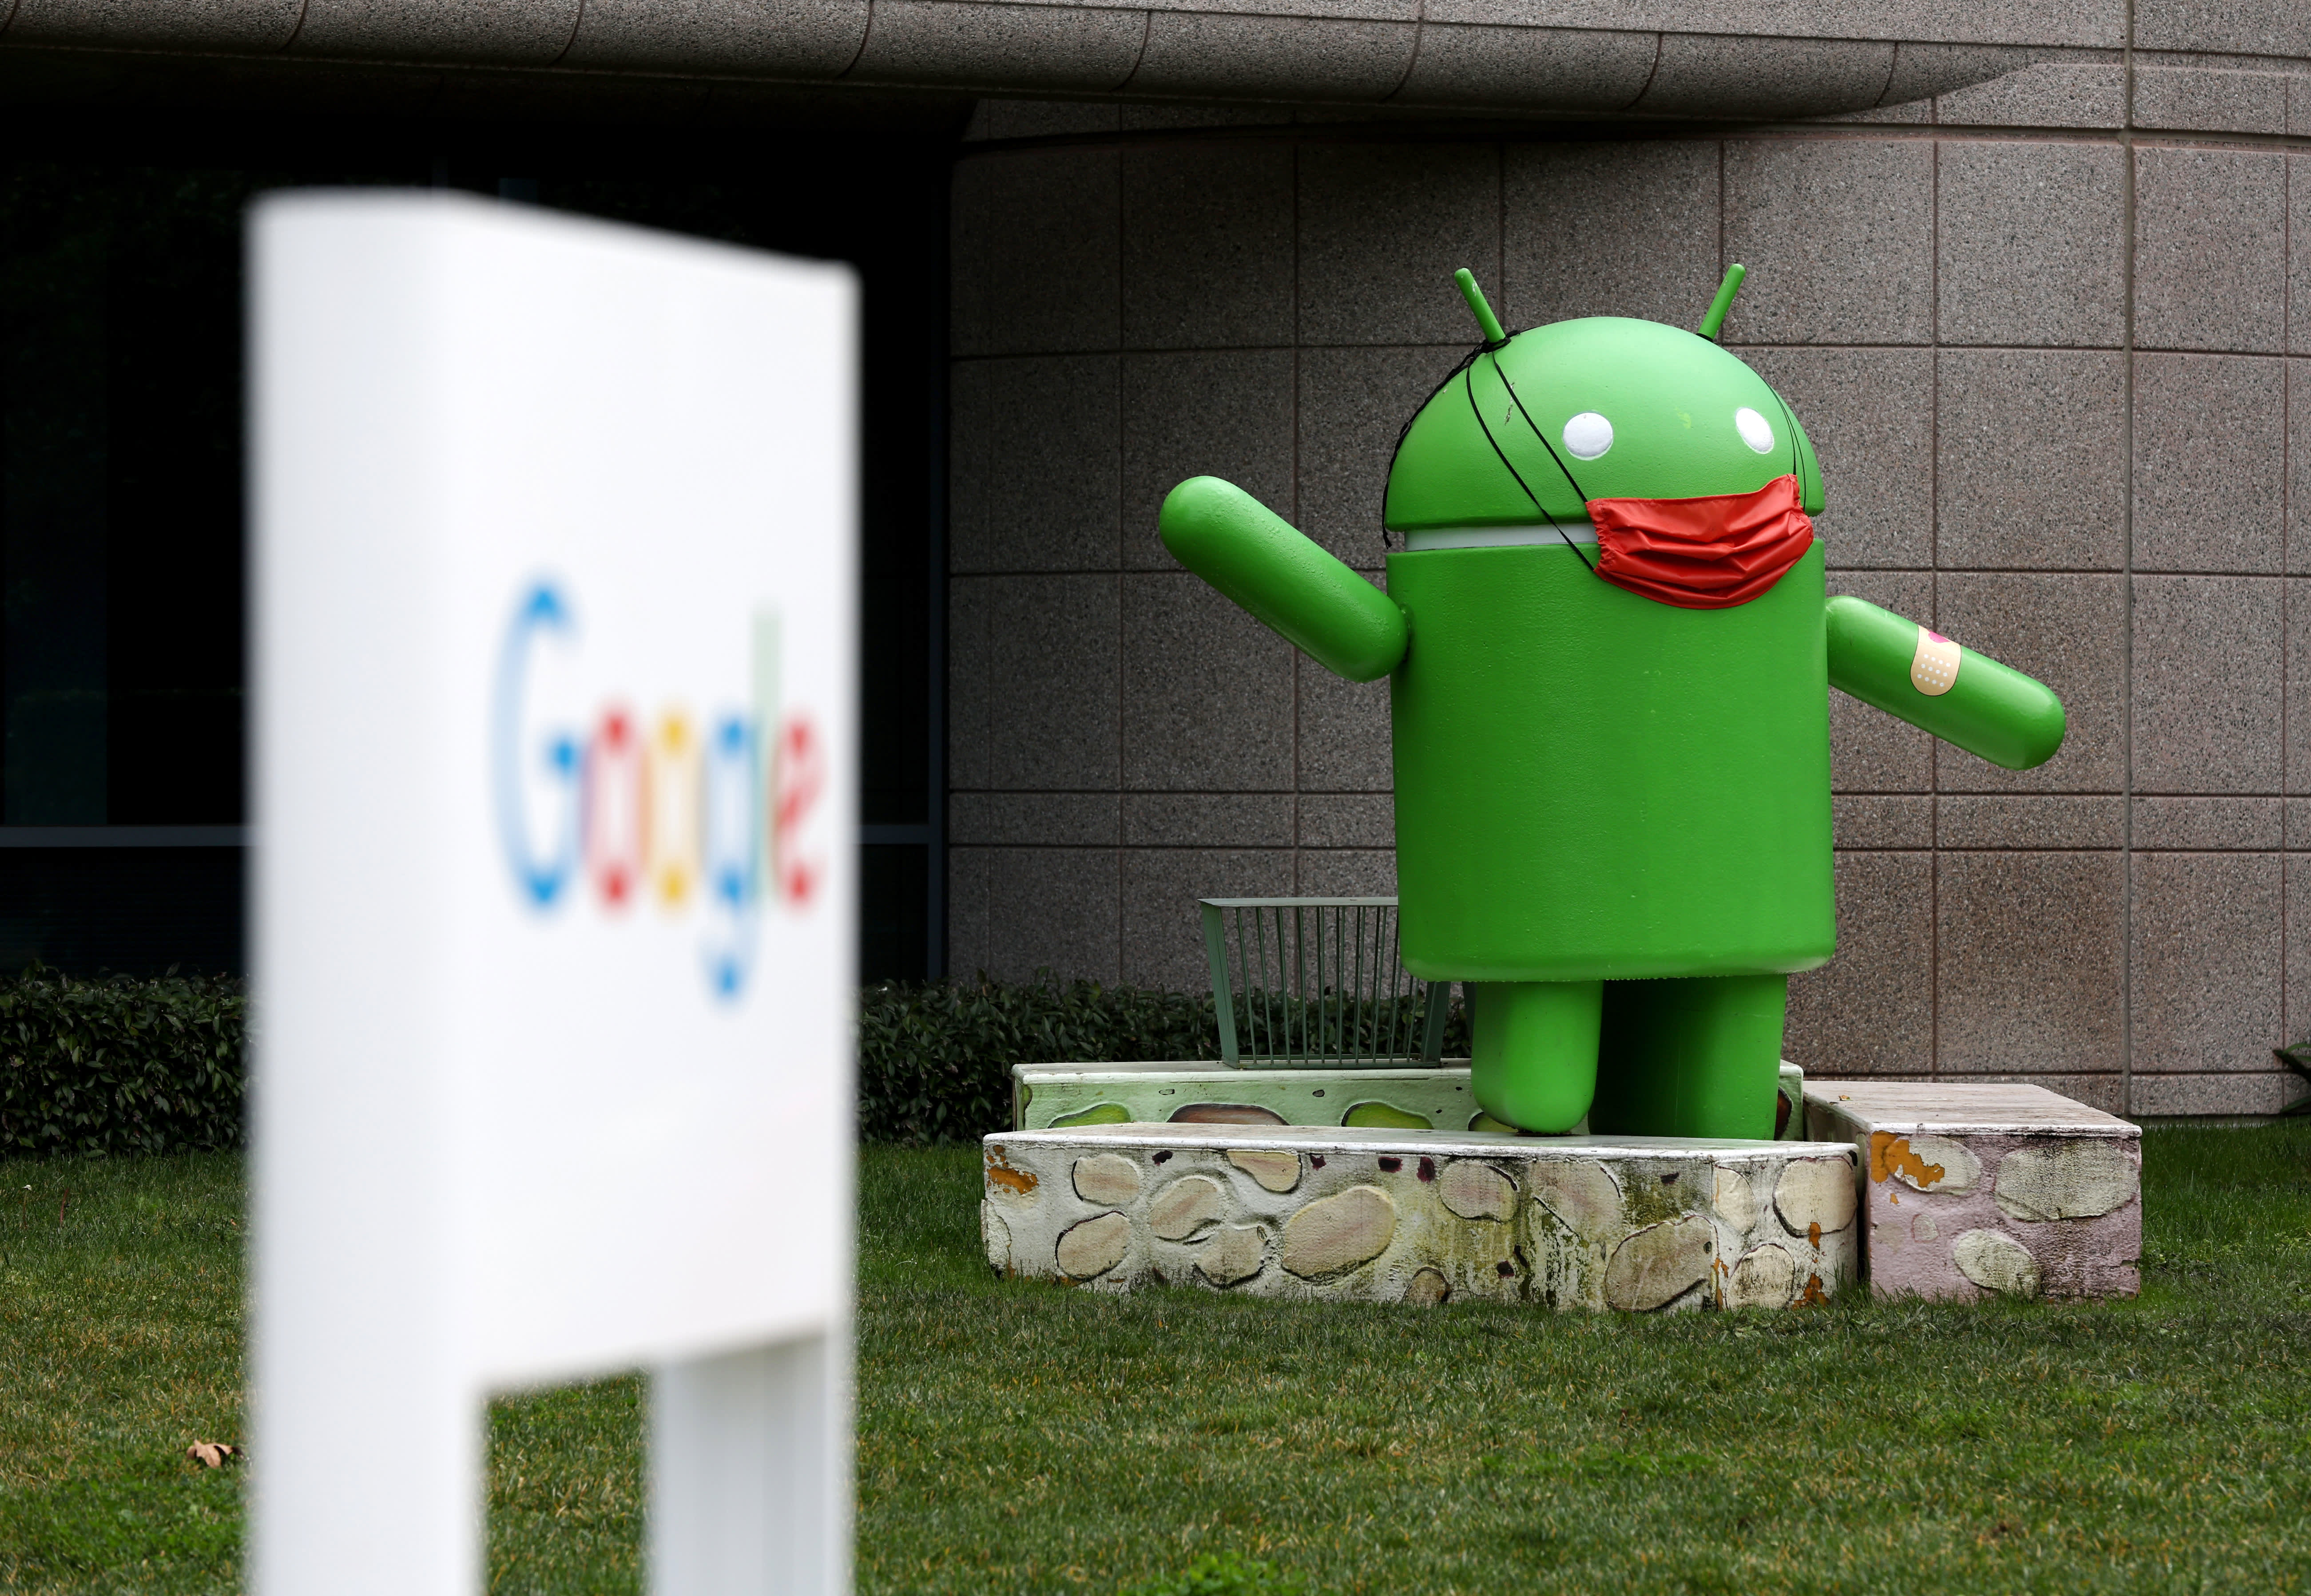 An Android statue is displayed in front of a building on the Google campus on January 31, 2022 in Mountain View, California. Google parent company Alphabet will report fourth quarter earnings on Tuesday after the closing bell.